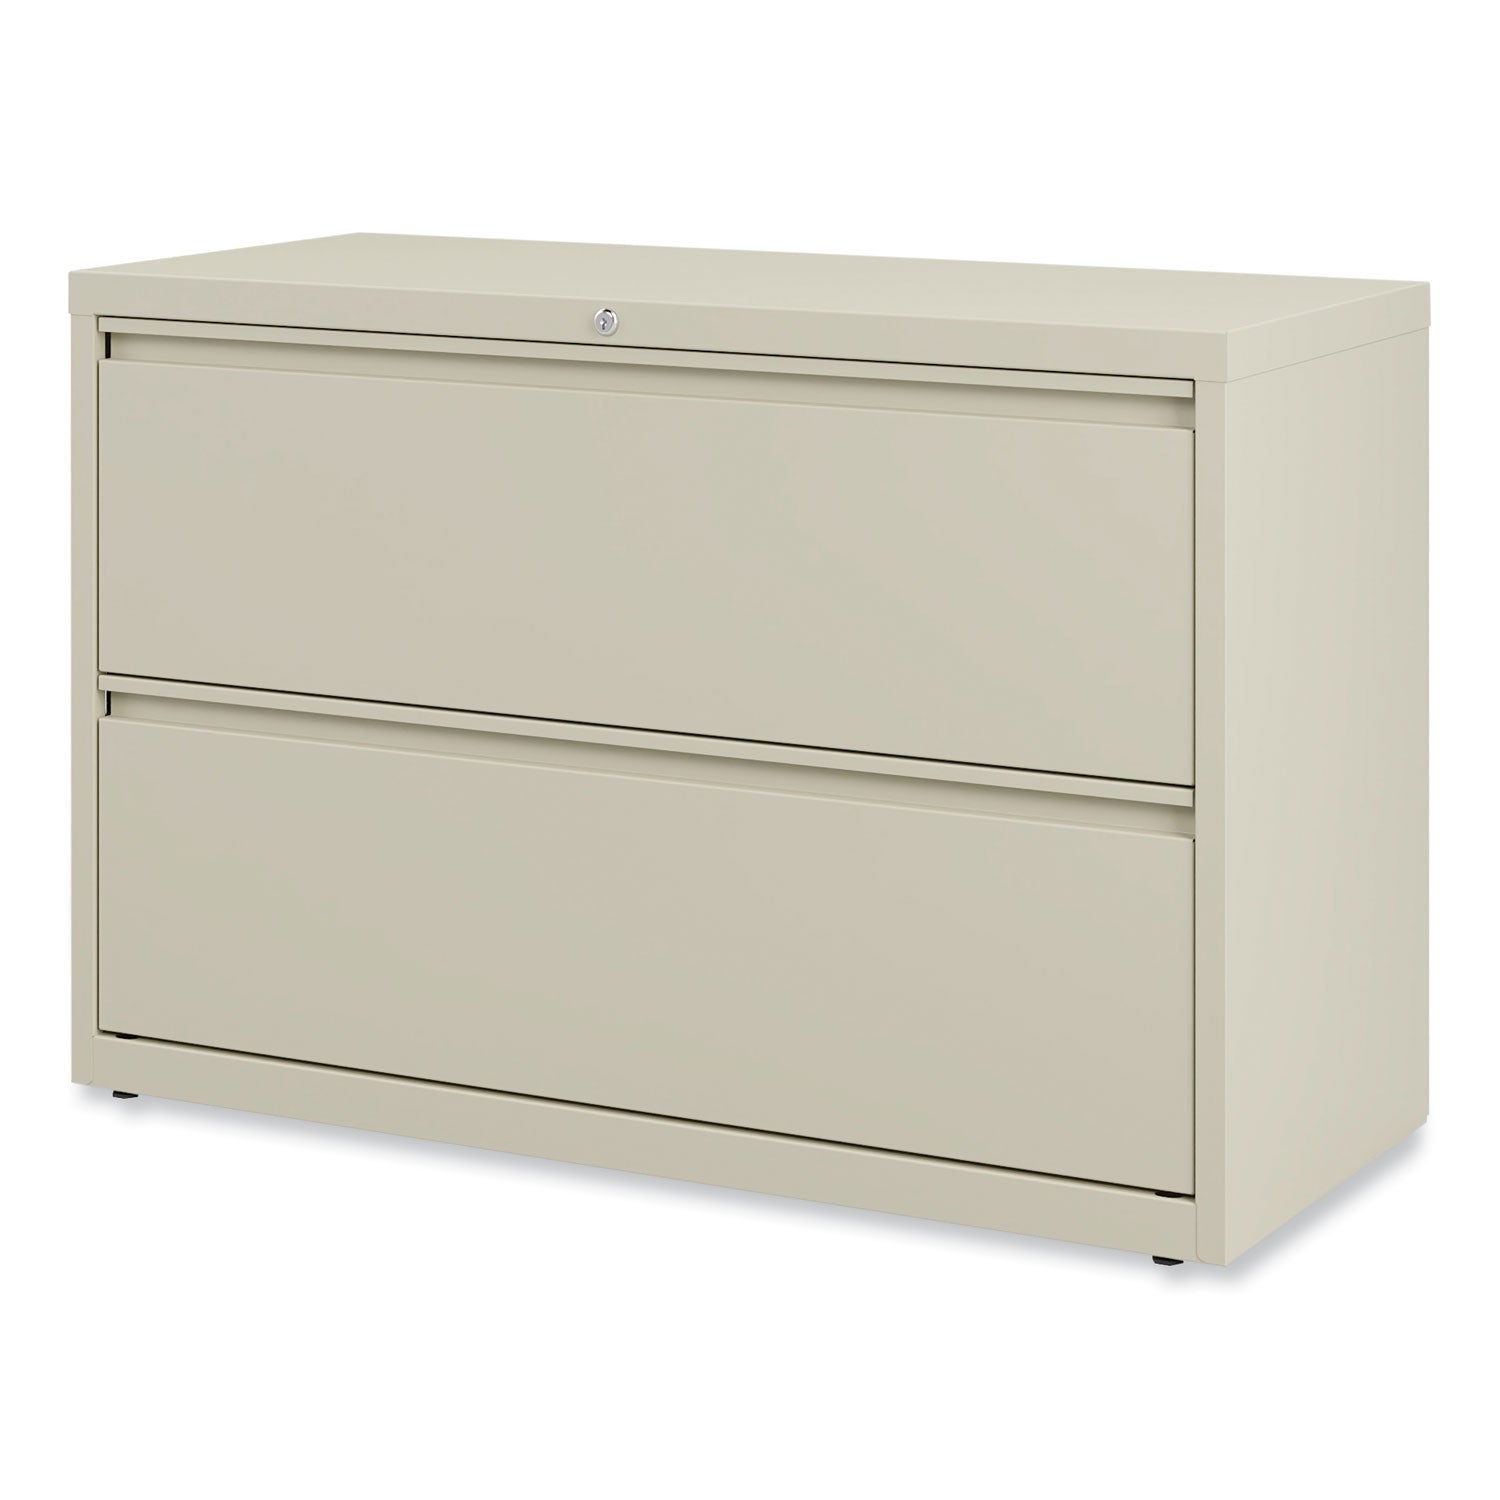 lateral-file-2-legal-letter-size-file-drawers-putty-42-x-1863-x-28_alehlf4229py - 8